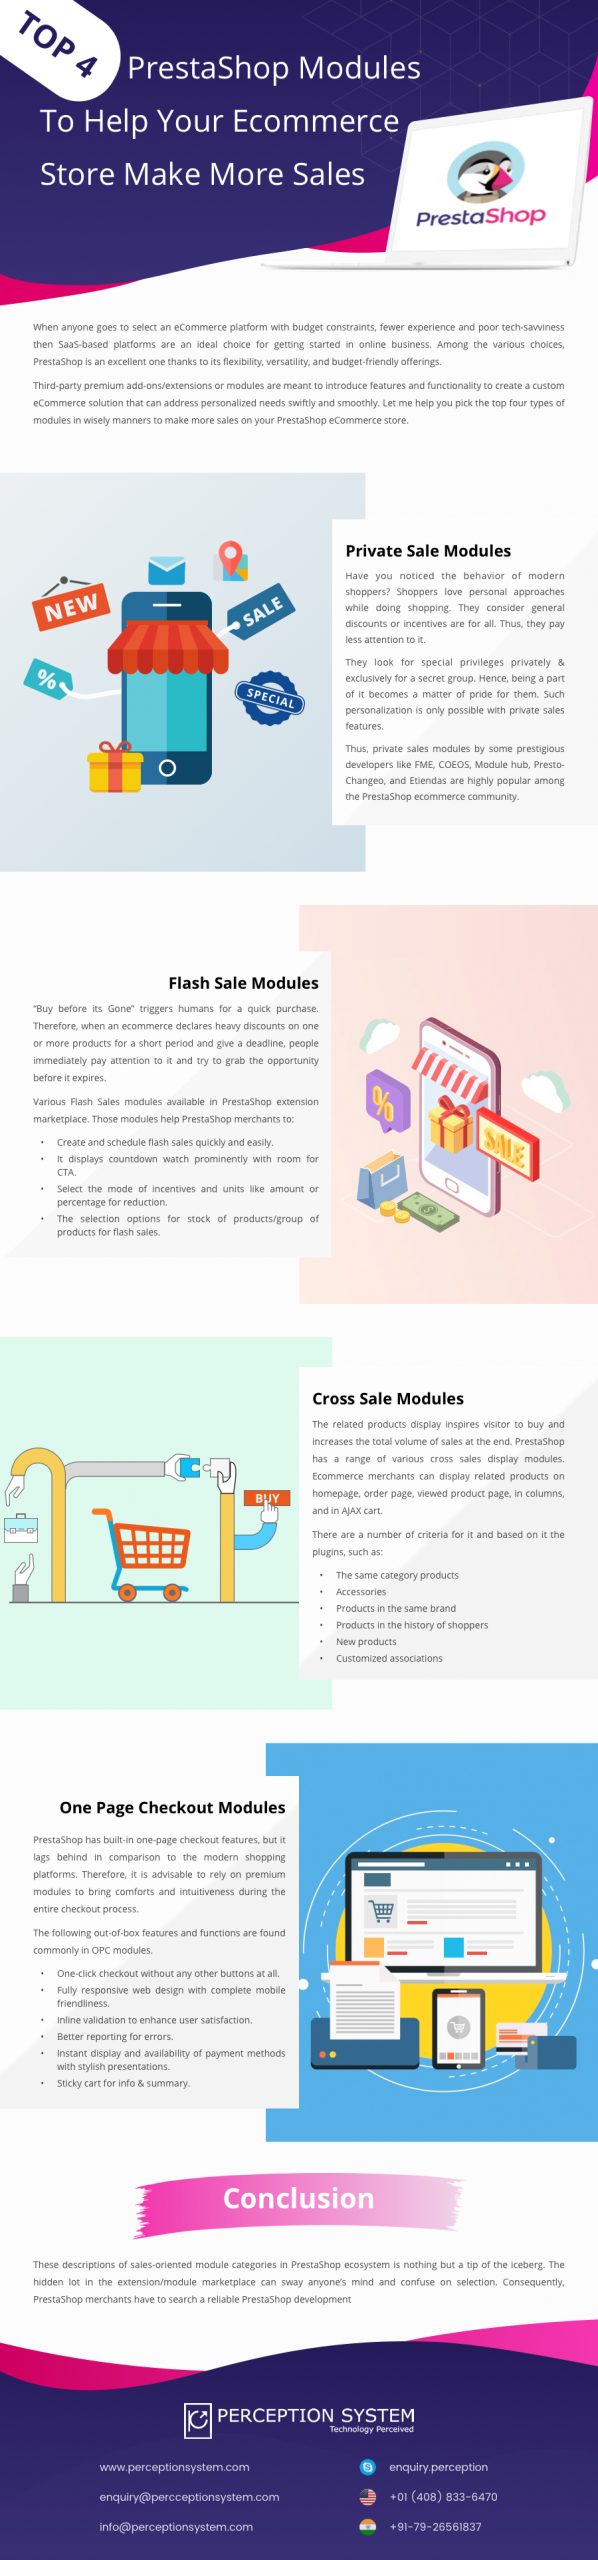 Top-4-PrestaShop-Modules-To-Help-Your-Ecommerce-Store-Make-More-Sales-scaled